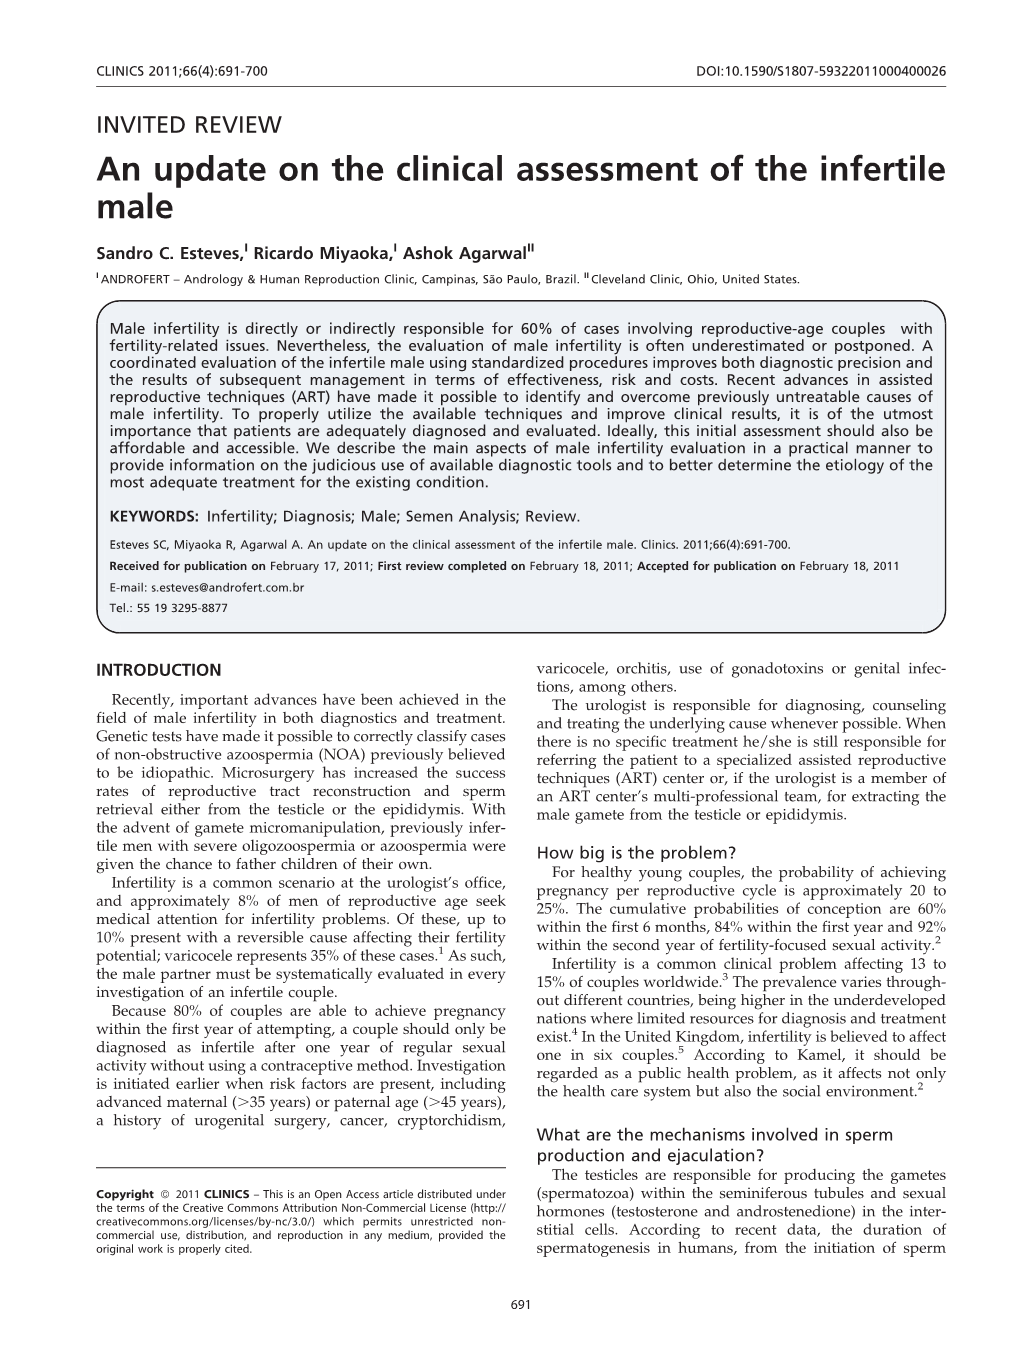 An Update on the Clinical Assessment of the Infertile Male